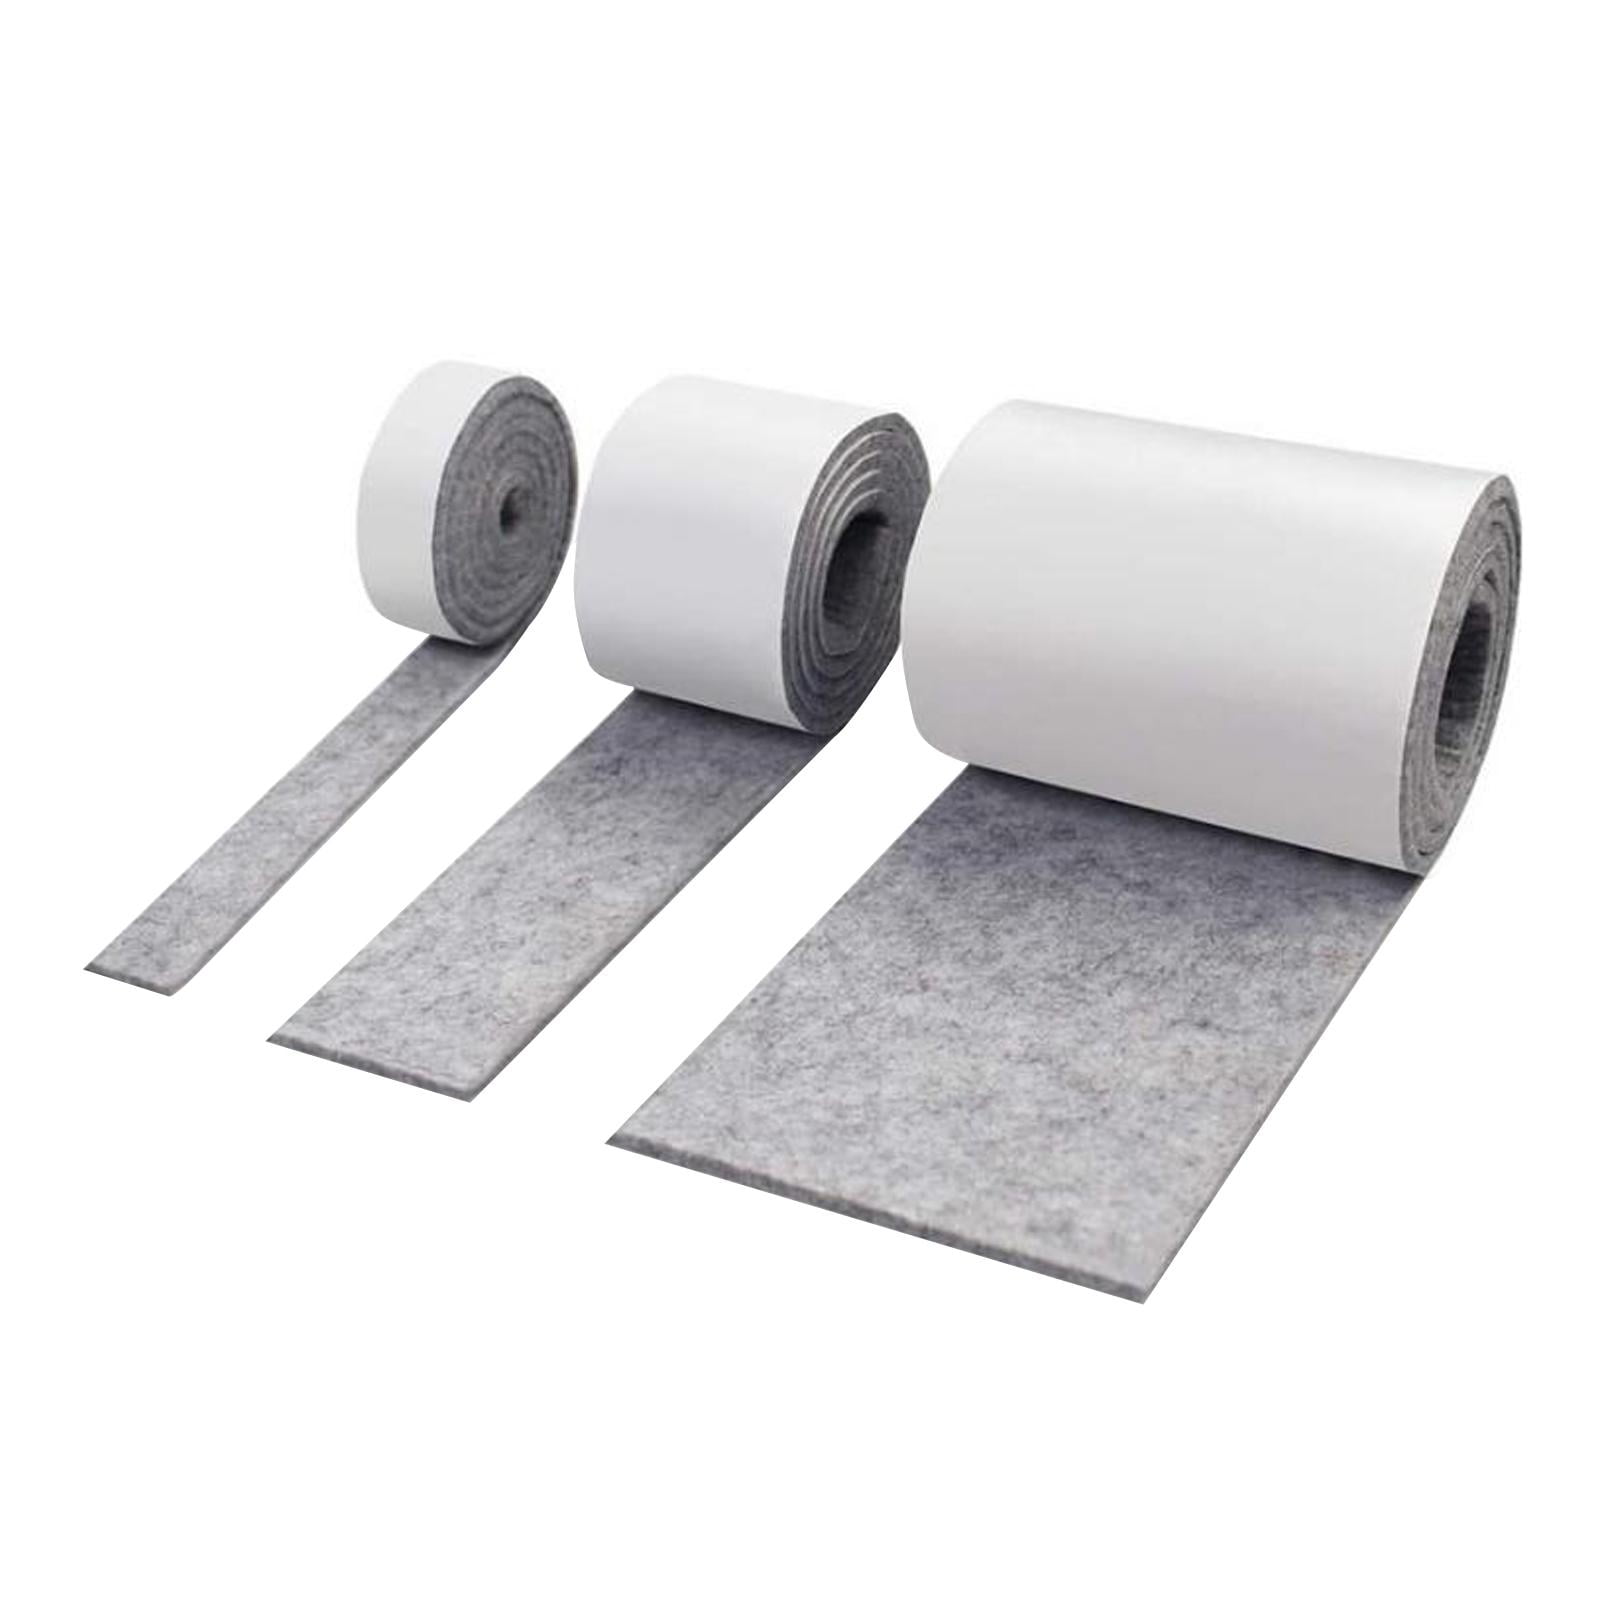 One Metre x 450mm wide roll of WHITE STICKY BACK SELF ADHESIVE FELT / BAIZE